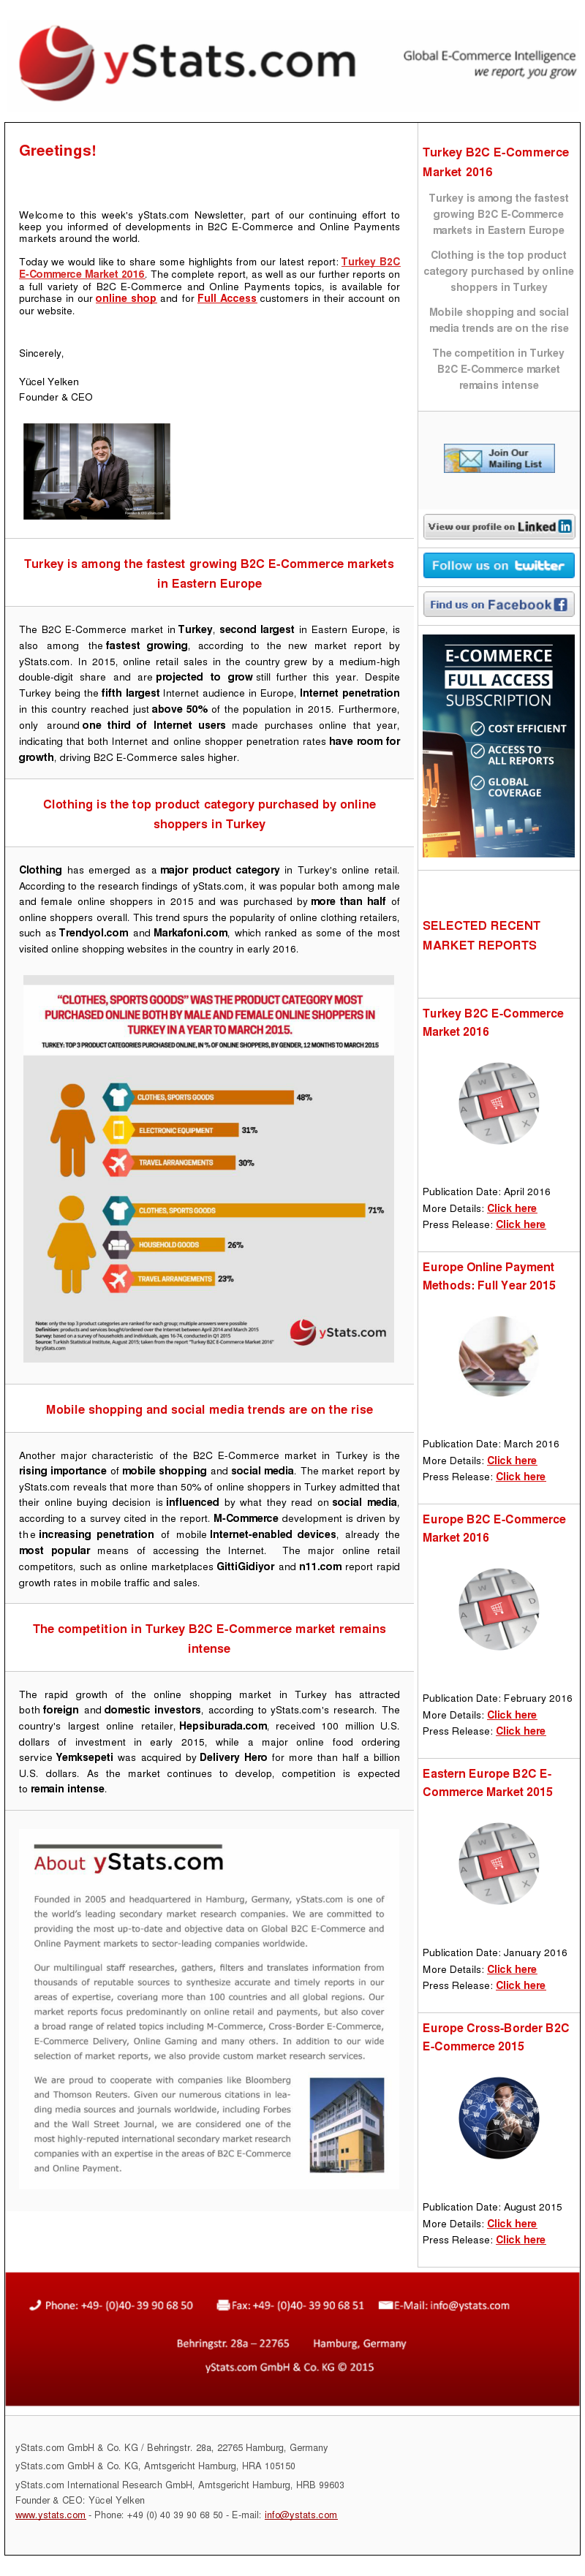 yStats.com Newsletter Turkey B2C E-Commerce Market 2015, ecommerce trends , online retail sales , ecommerce competitors , turkey ecommerce major product category , online shopper penetration rate , trendyol.com , markafoni.com , gittigidiyor , n11.com , hepsiburada.com , delivery hero , yemksepeti , mobile shopping market , m-commerce , online shopper , market size , online shoppers , mobile shopping , ecommerce players , online shopping , online retail companies competition , newsletter , 2016 , The B2C E-Commerce market in Turkey, second largest in Eastern Europe, is also among the fastest growing, according to the new market report by yStats.com. In 2015, online retail sales in the country grew by a medium-high double-digit share and are projected to grow still further this year. Despite Turkey being the fifth largest Internet audience in Europe, Internet penetration in this country reached just above 50% of the population in 2015. Furthermore, only around one third of Internet users made purchases online that year, indicating that both Internet and online shopper penetration rates have room for growth, driving B2C E-Commerce sales higher.

Clothing has emerged as a major product category in Turkey’s online retail. According to the research findings of yStats.com, it was popular both among male and female online shoppers in 2015 and was purchased by more than half of online shoppers overall. This trend spurs the popularity of online clothing retailers, such as Trendyol.com and Markafoni.com, which ranked as some of the most visited online shopping websites in the country in early 2016.

Another major characteristic of the B2C E-Commerce market in Turkey is the rising importance of mobile shopping and social media. The market report by yStats.com reveals that more than 50% of online shoppers in Turkey admitted that their online buying decision is influenced by what they read on social media, according to a survey cited in the report. M-Commerce development is driven by the increasing penetration of mobile Internet-enabled devices, already the most popular means of accessing the Internet.  The major online retail competitors, such as online marketplaces GittiGidiyor and n11.com report rapid growth rates in mobile traffic and sales.

The rapid growth of the online shopping market in Turkey has attracted both foreign and domestic investors, according to yStats.com’s research. The country’s largest online retailer, Hepsiburada.com, received 100 million U.S. dollars of investment in early 2015, while a major online food ordering service Yemksepeti was acquired by Delivery Hero for more than half a billion U.S. dollars. As the market continues to develop, competition is expected to remain intense.